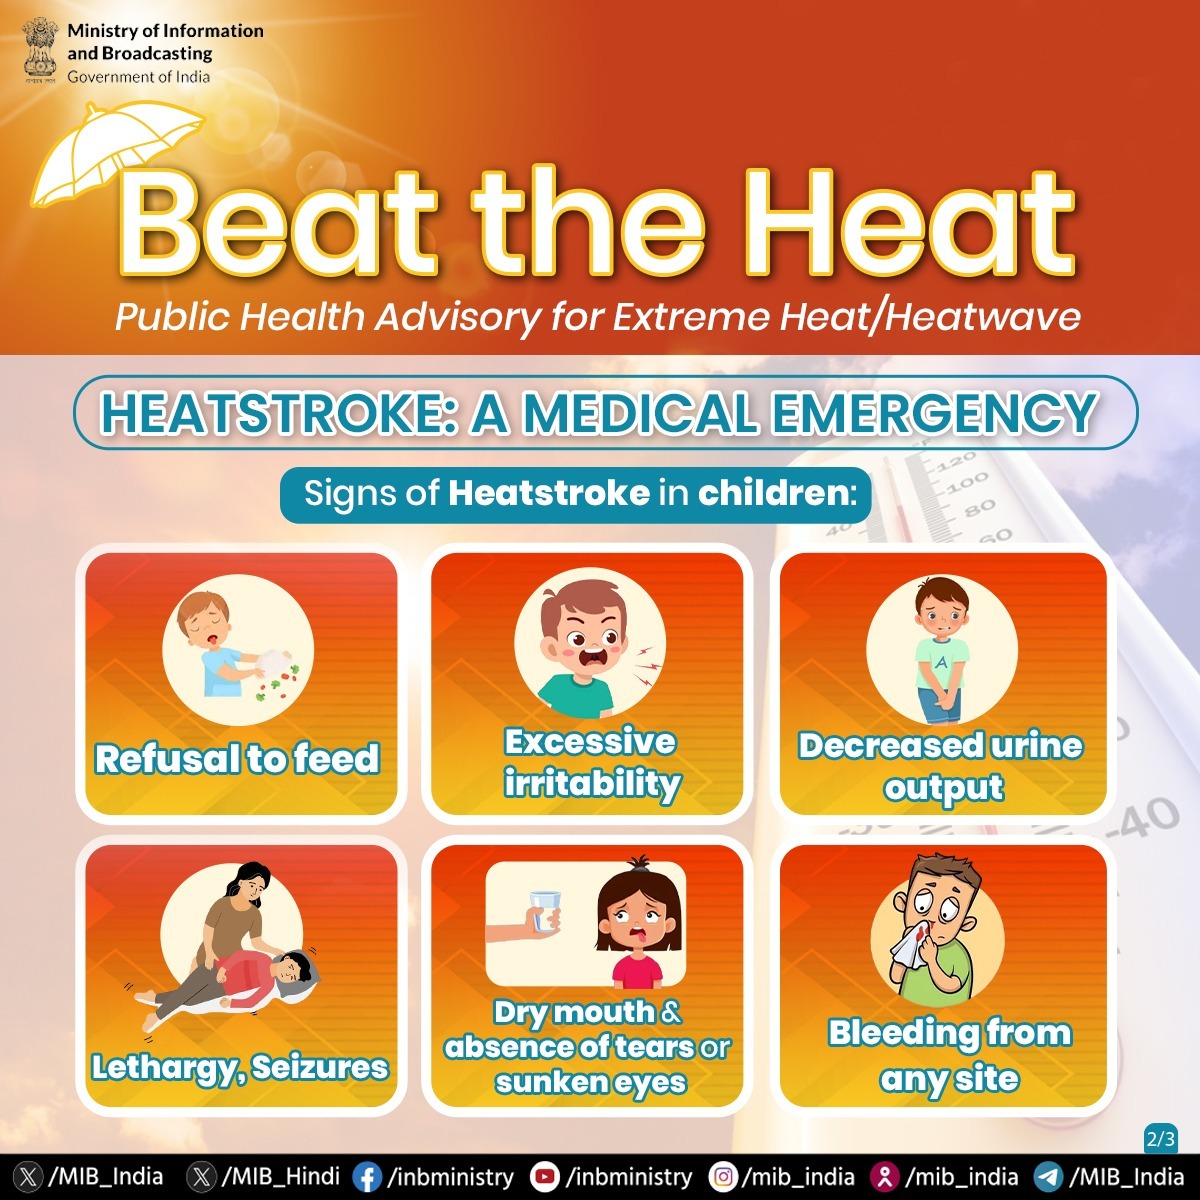 #HeatWave: Beat the Heat! 📝Public Health Advisory for Extreme Heat/Heatwave☀️ ➡️Heatstroke: A medical emergency Signs of Heatstroke in children: 💠Refusal to feed 💠Excessive irritability 💠Decreased urine output 💠Lethargy, Seizures 💠Dry mouth & absence of tears or…